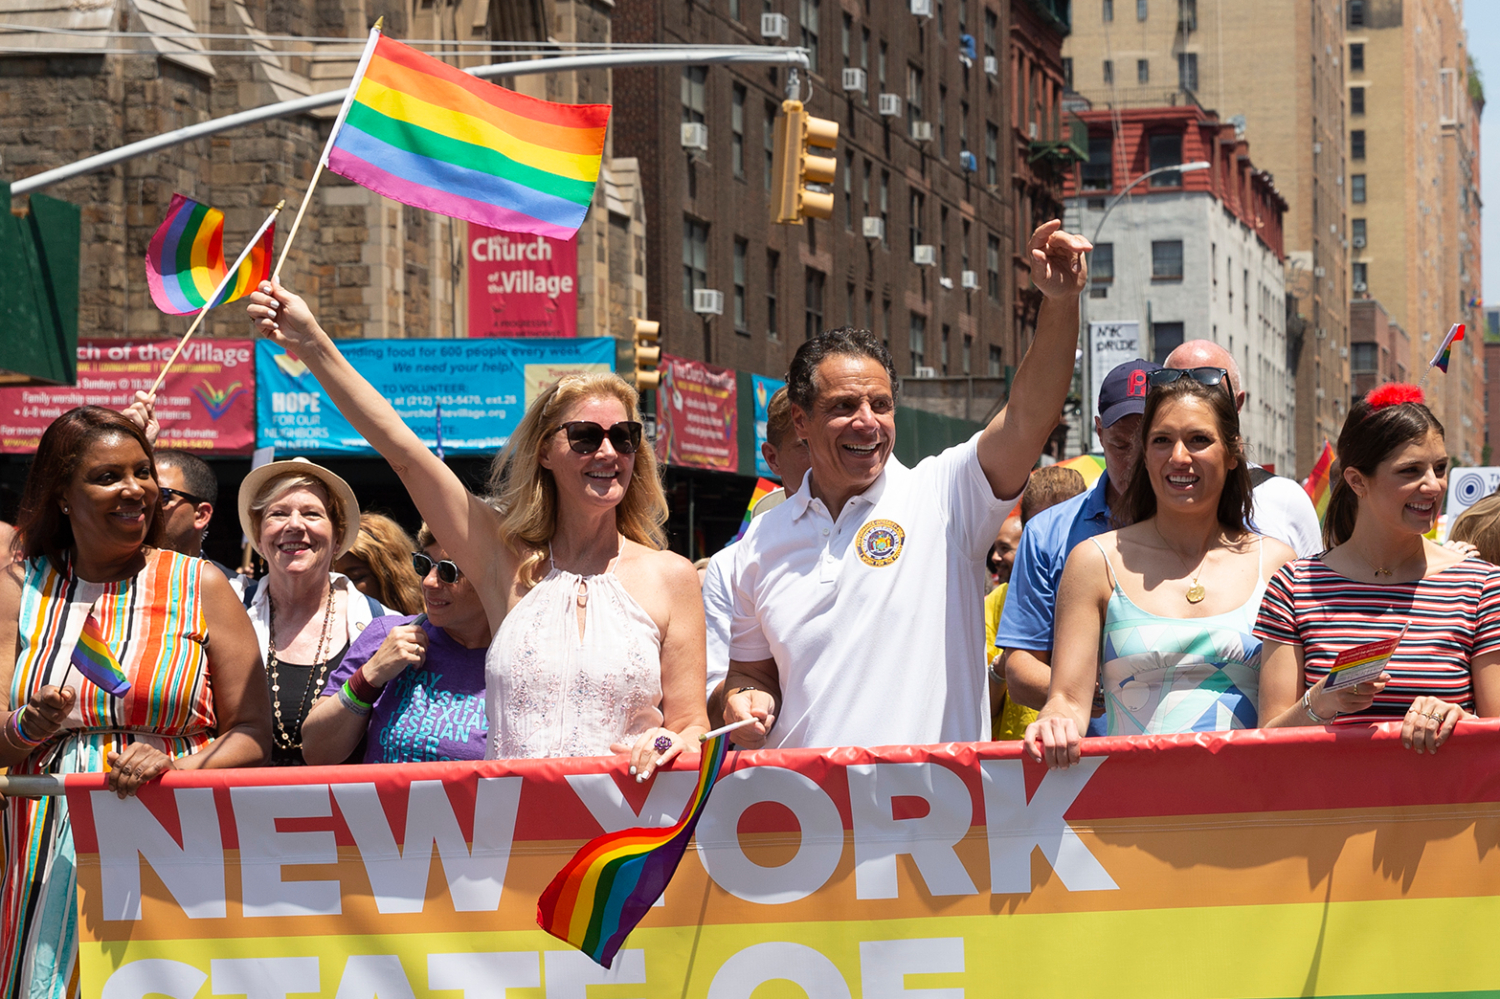 Sandra Lee and Andrew Cuomo attend 49th annual New York pride parade